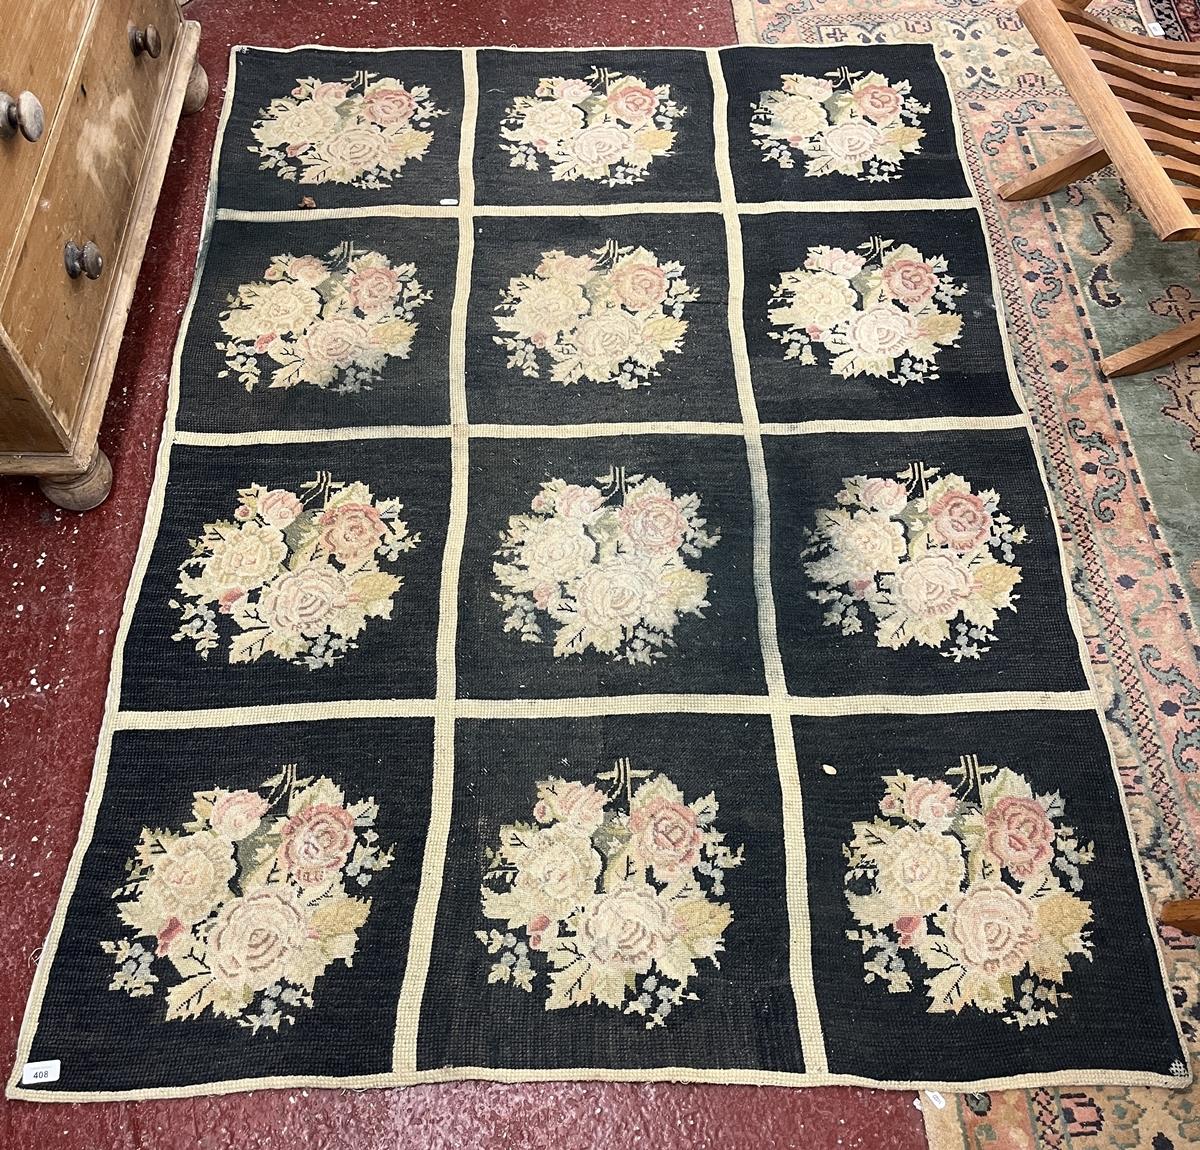 Tapestry carpet - Approx size: 182cm x 131cm